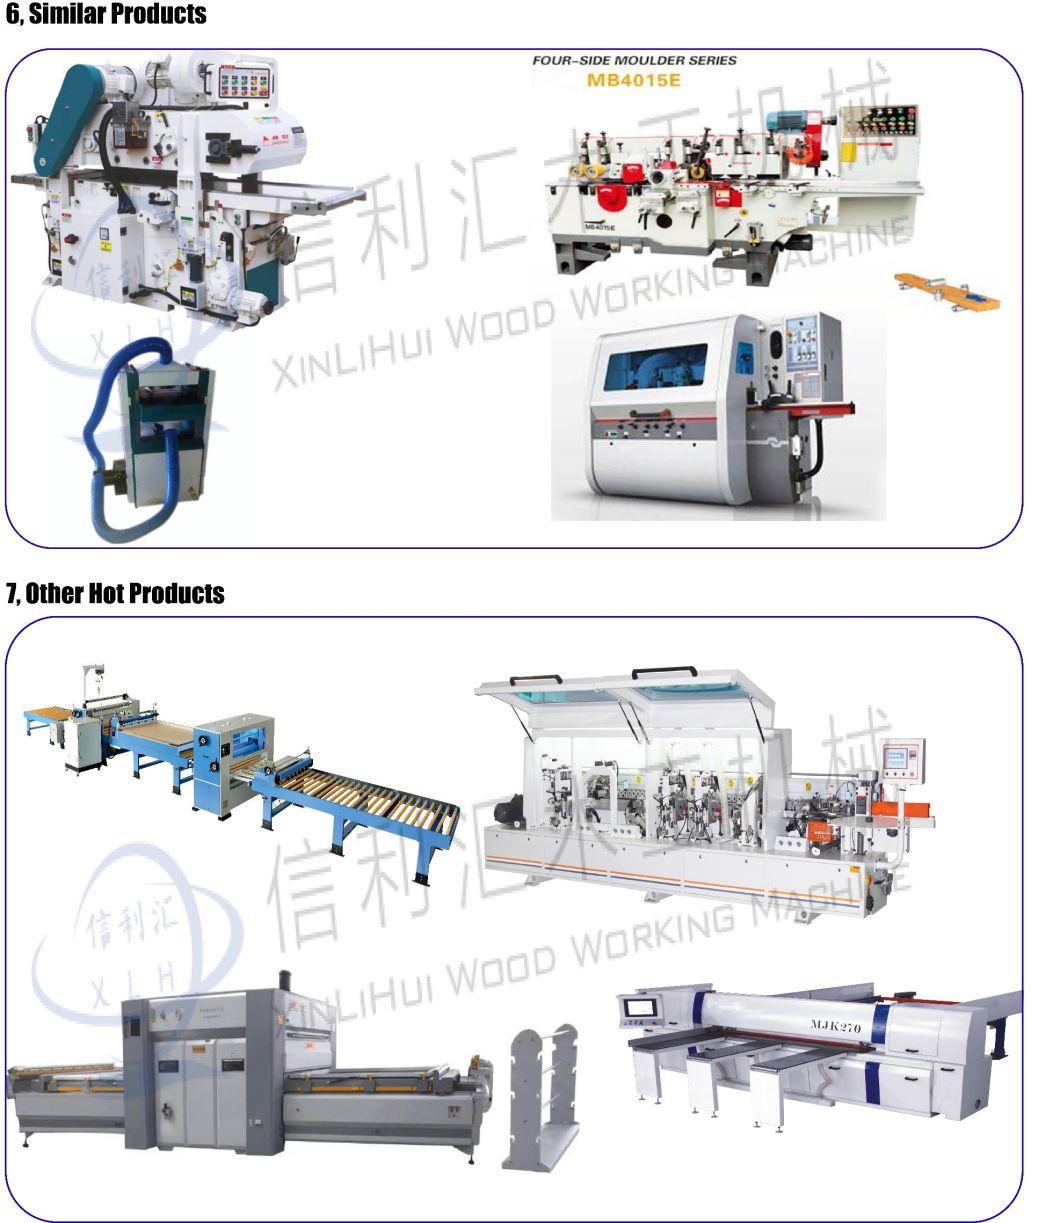 High Speed Four Sided Wood Planer for Making Flooring Automatic High Speed 4 Side Planer Moulder with 6 Spindles Moulder for Jointed Board